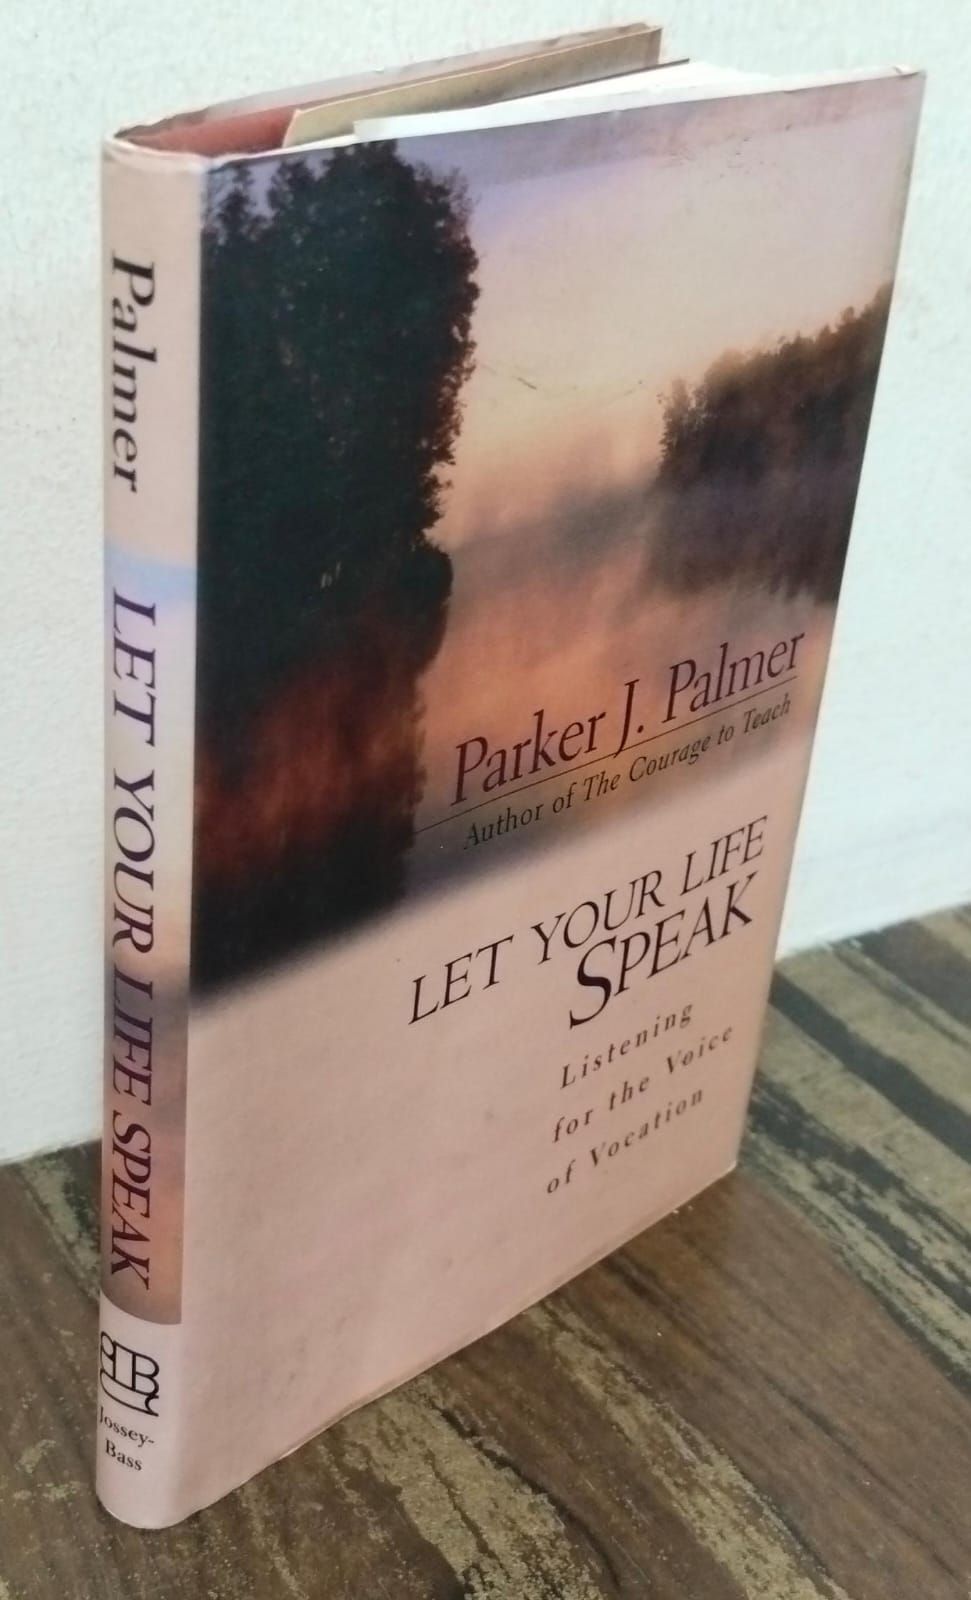 Let your life speak-listening for the voice of vocation [hardcover] [rare books]